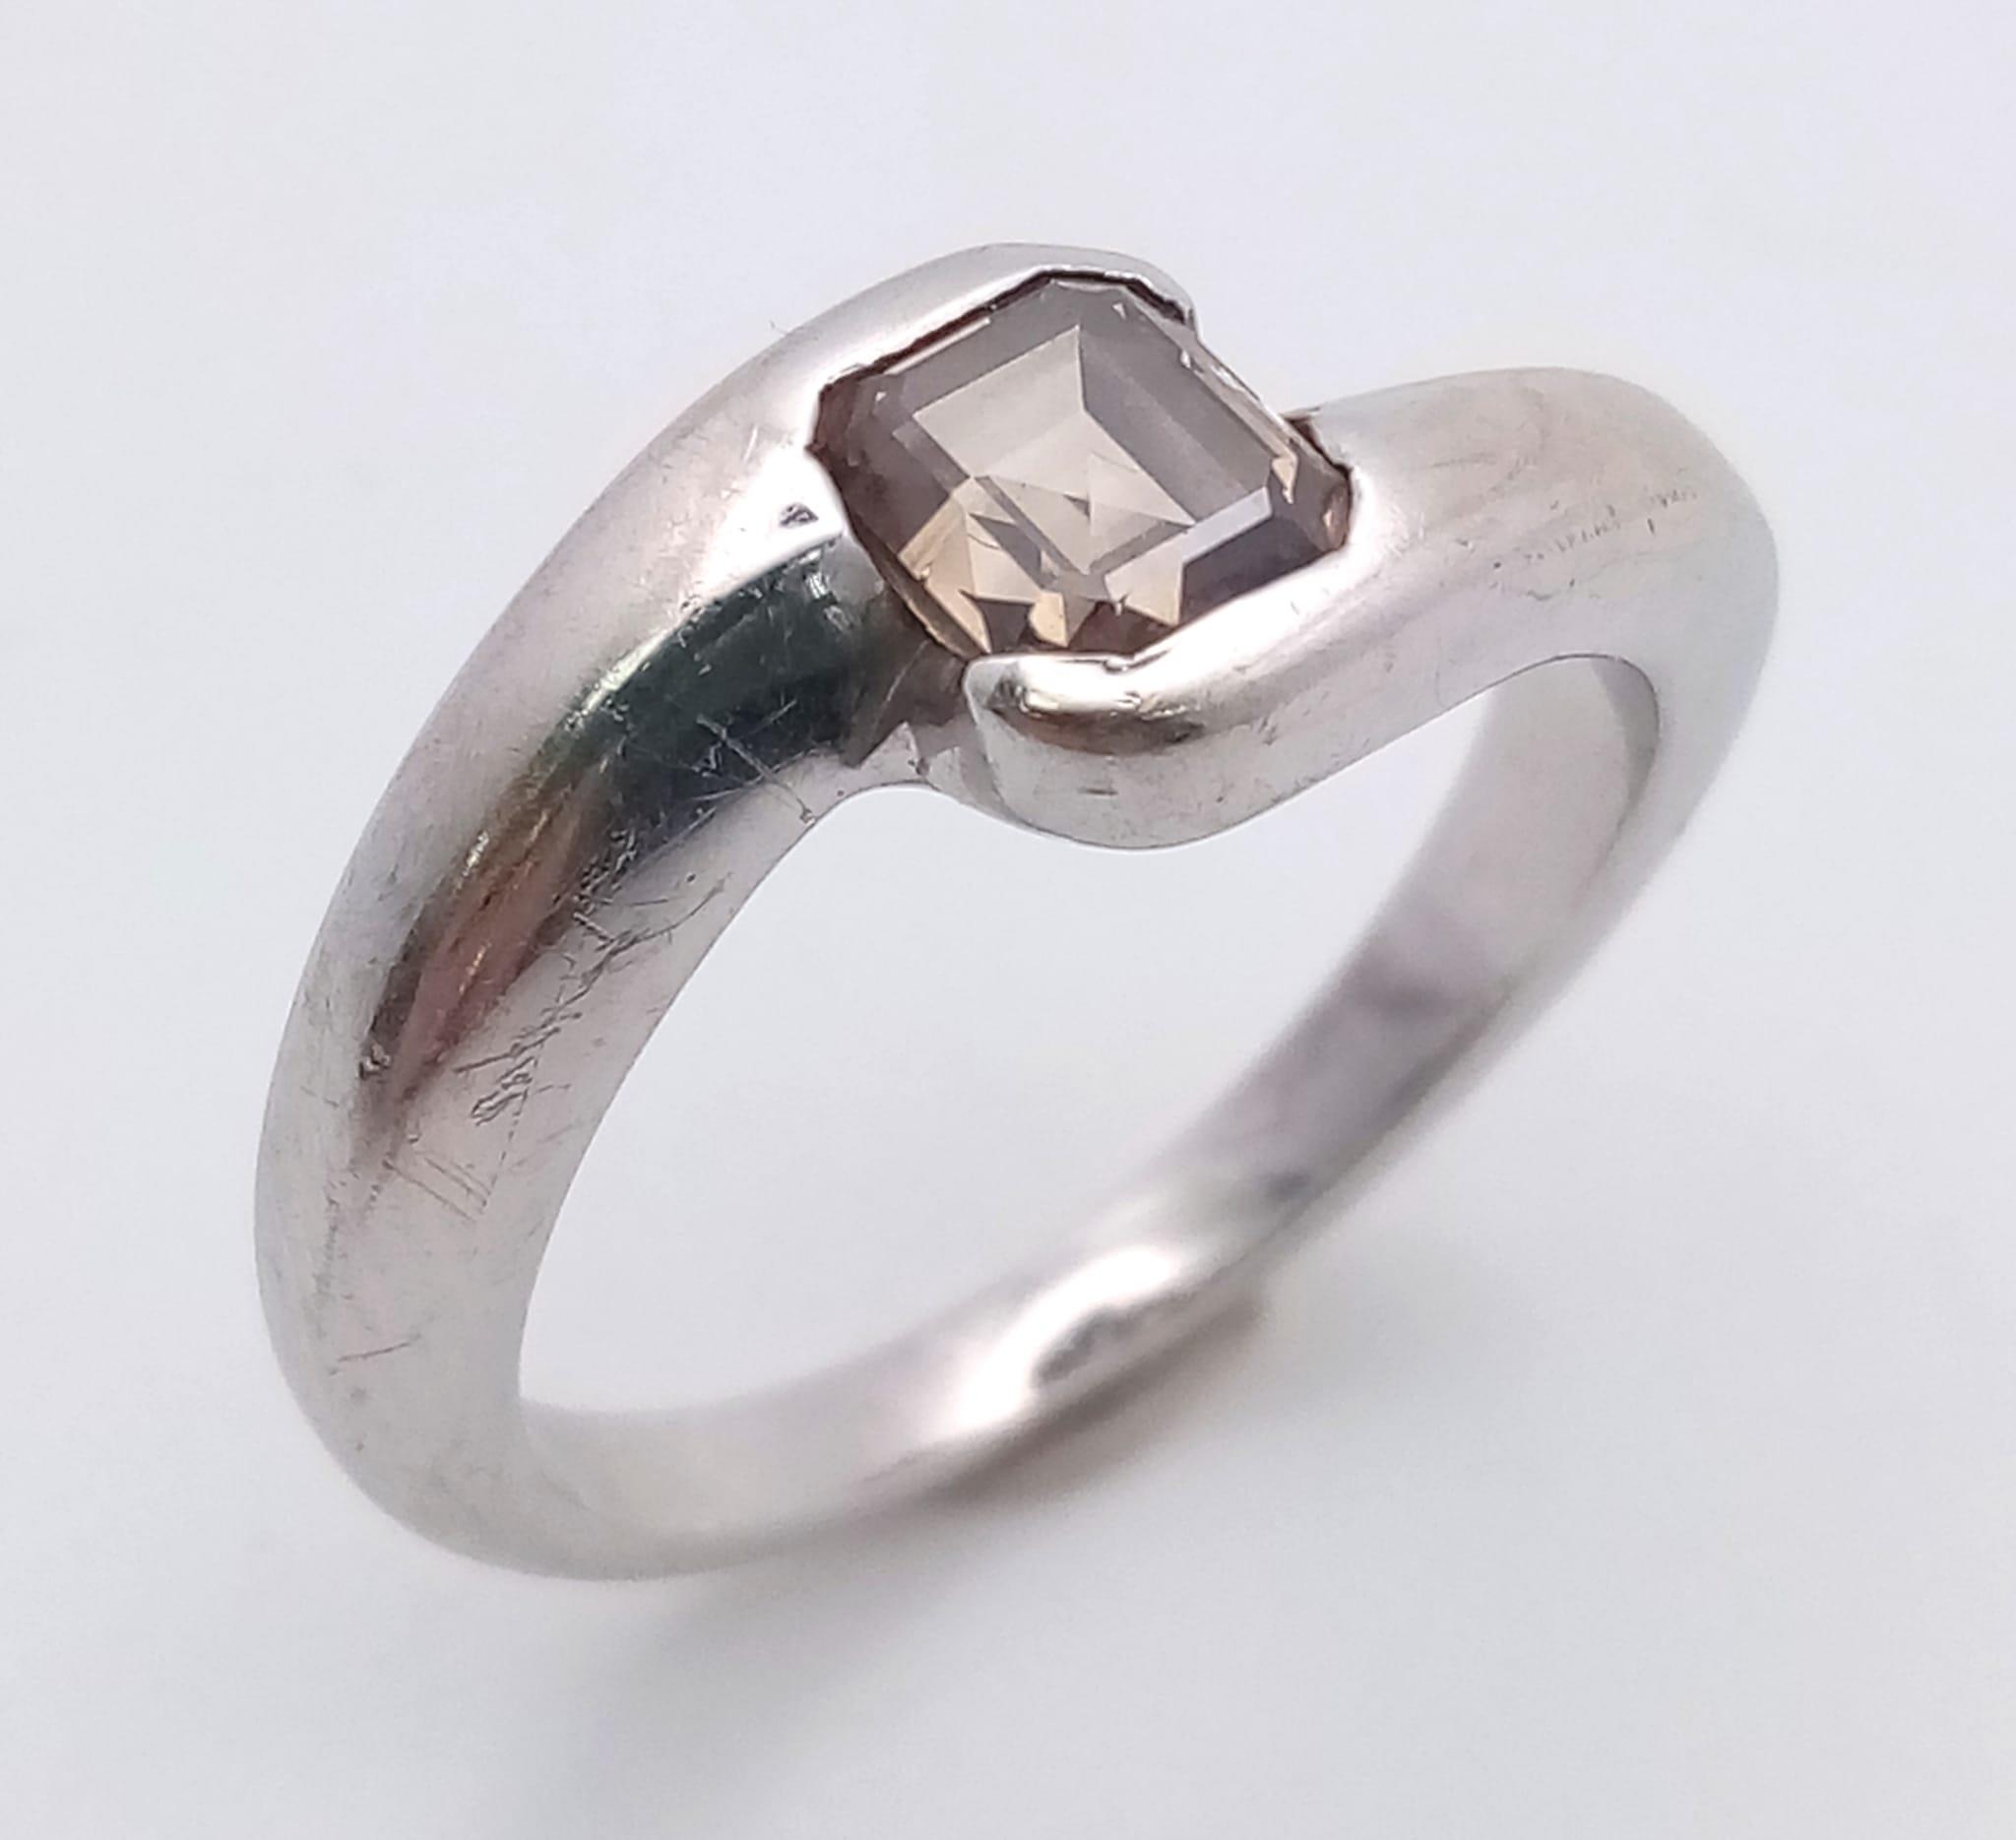 18K WHITE GOLD COGNAC DIAMOND SOLITAIRE RING EMERALD CUT 0.35CT 5.9G SIZE N - Image 2 of 11